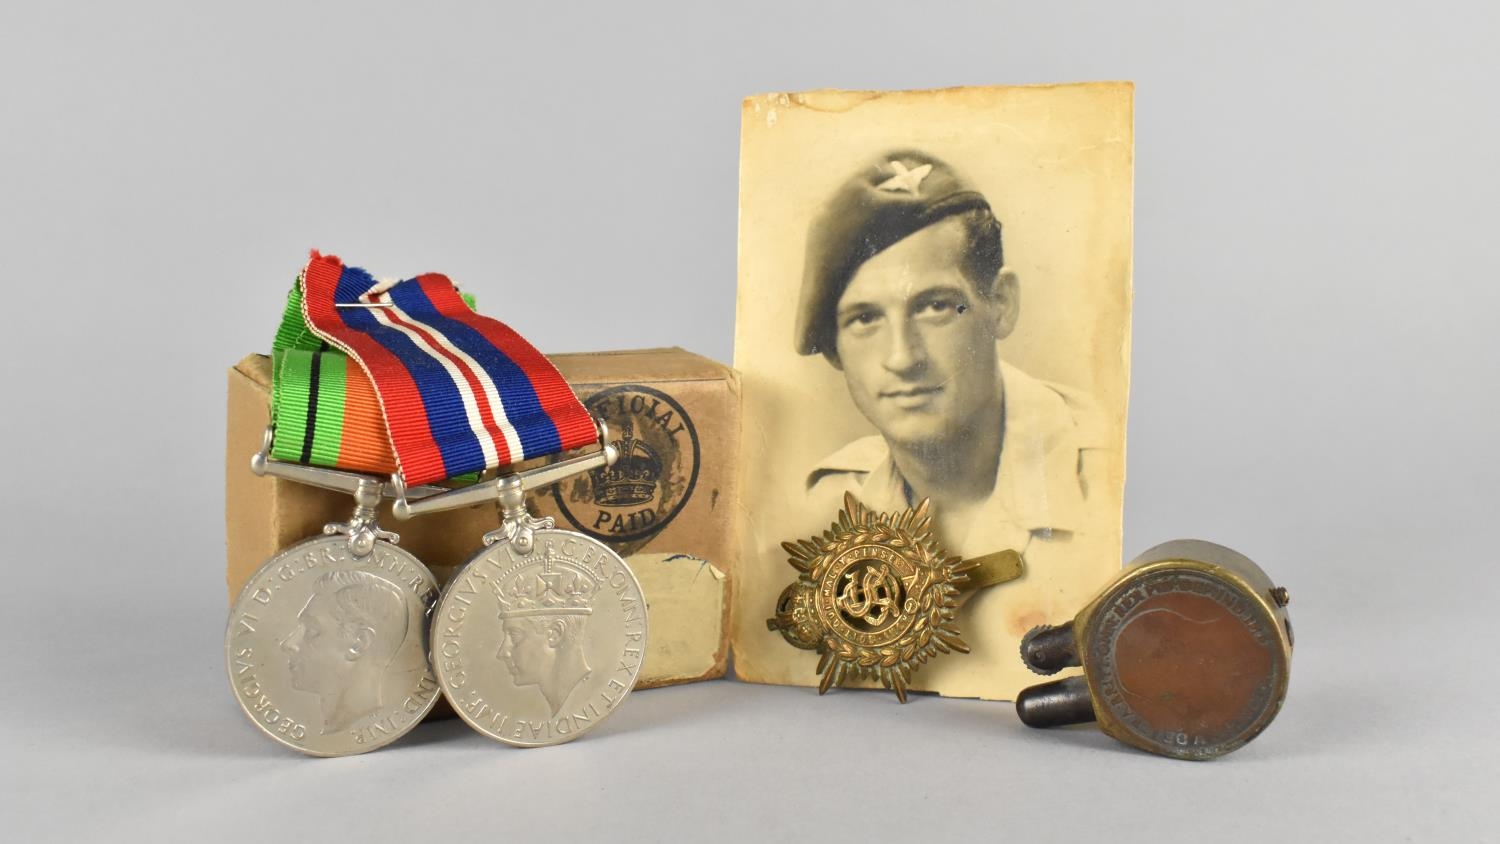 Two WWII Medals, Defence and War Medal, in Box for H. Humphries, together with Photograph, Cap Badge